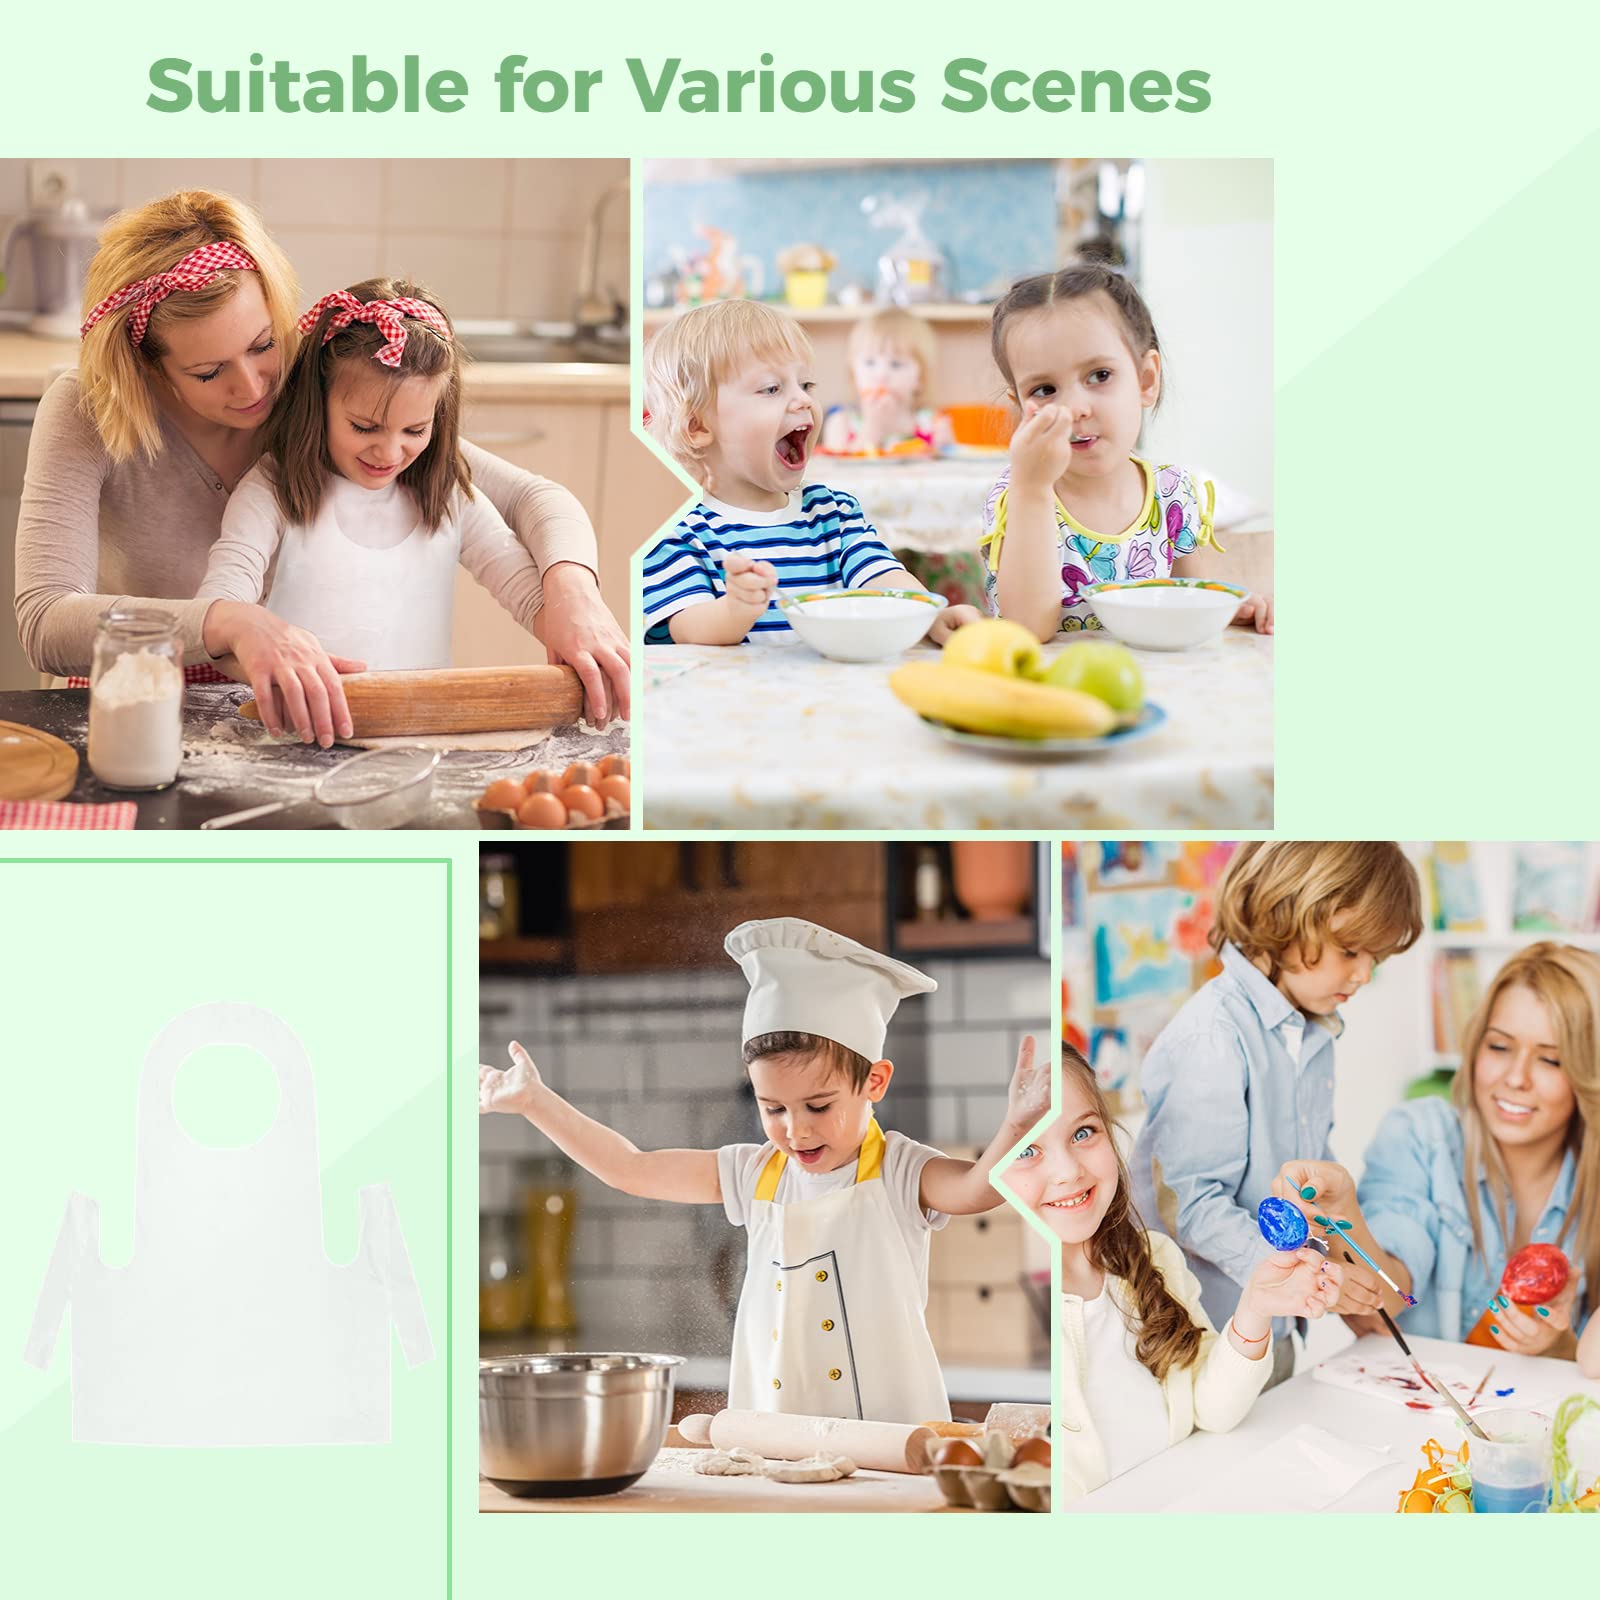 Lnrueg 100 PCS Disposable Kids Aprons, Clear Plastic Kids Aprons, Transparent Waterproof Oil-proof Aprons for Boys and Girls Aged 4 to 10, Children Aprons for Eating, Cooking, Baking, Painting